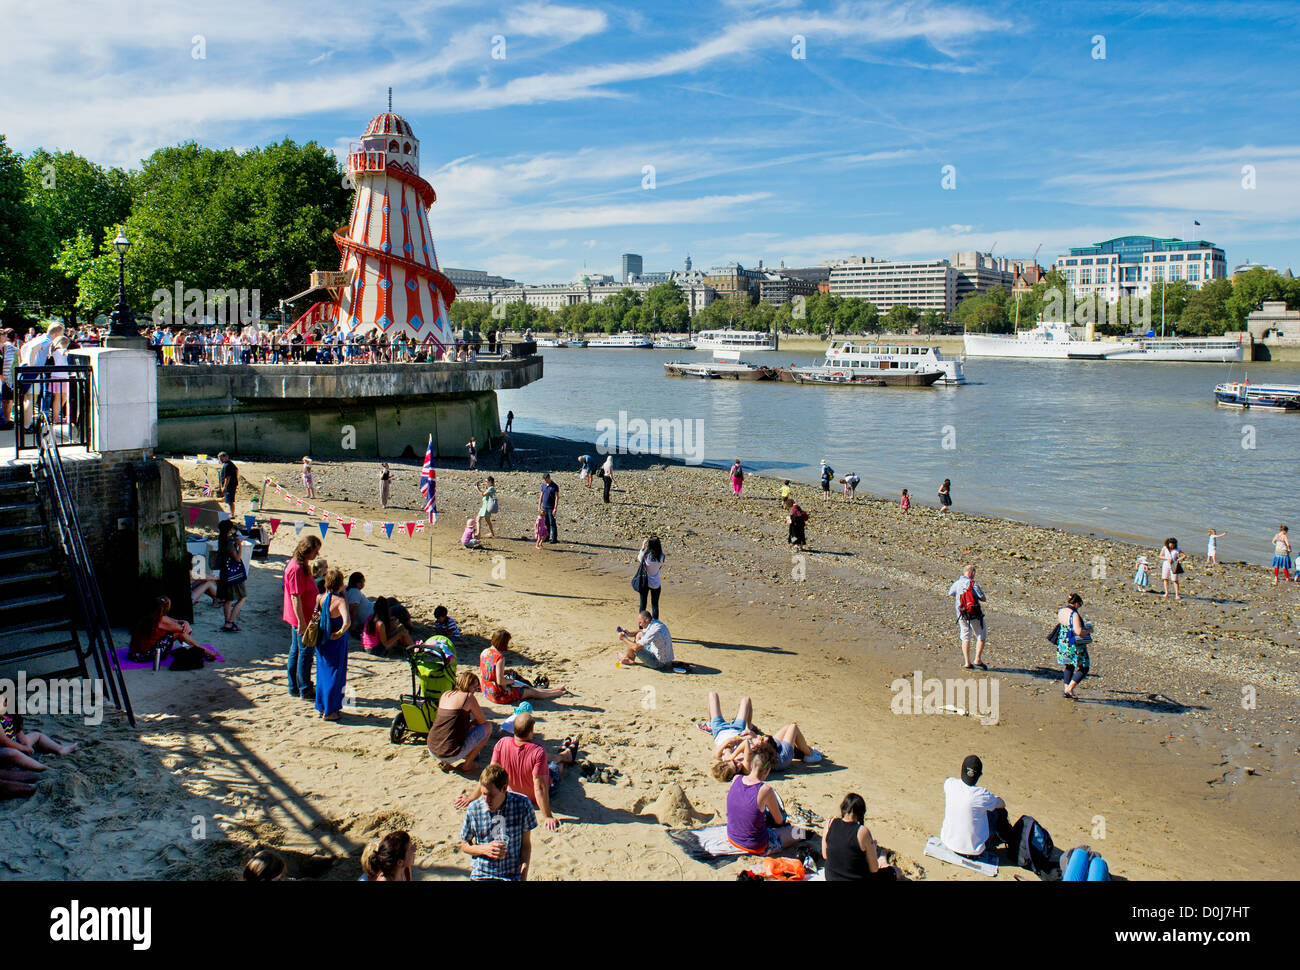 People enjoying themselves on the foreshore of the River Thames. Stock Photo